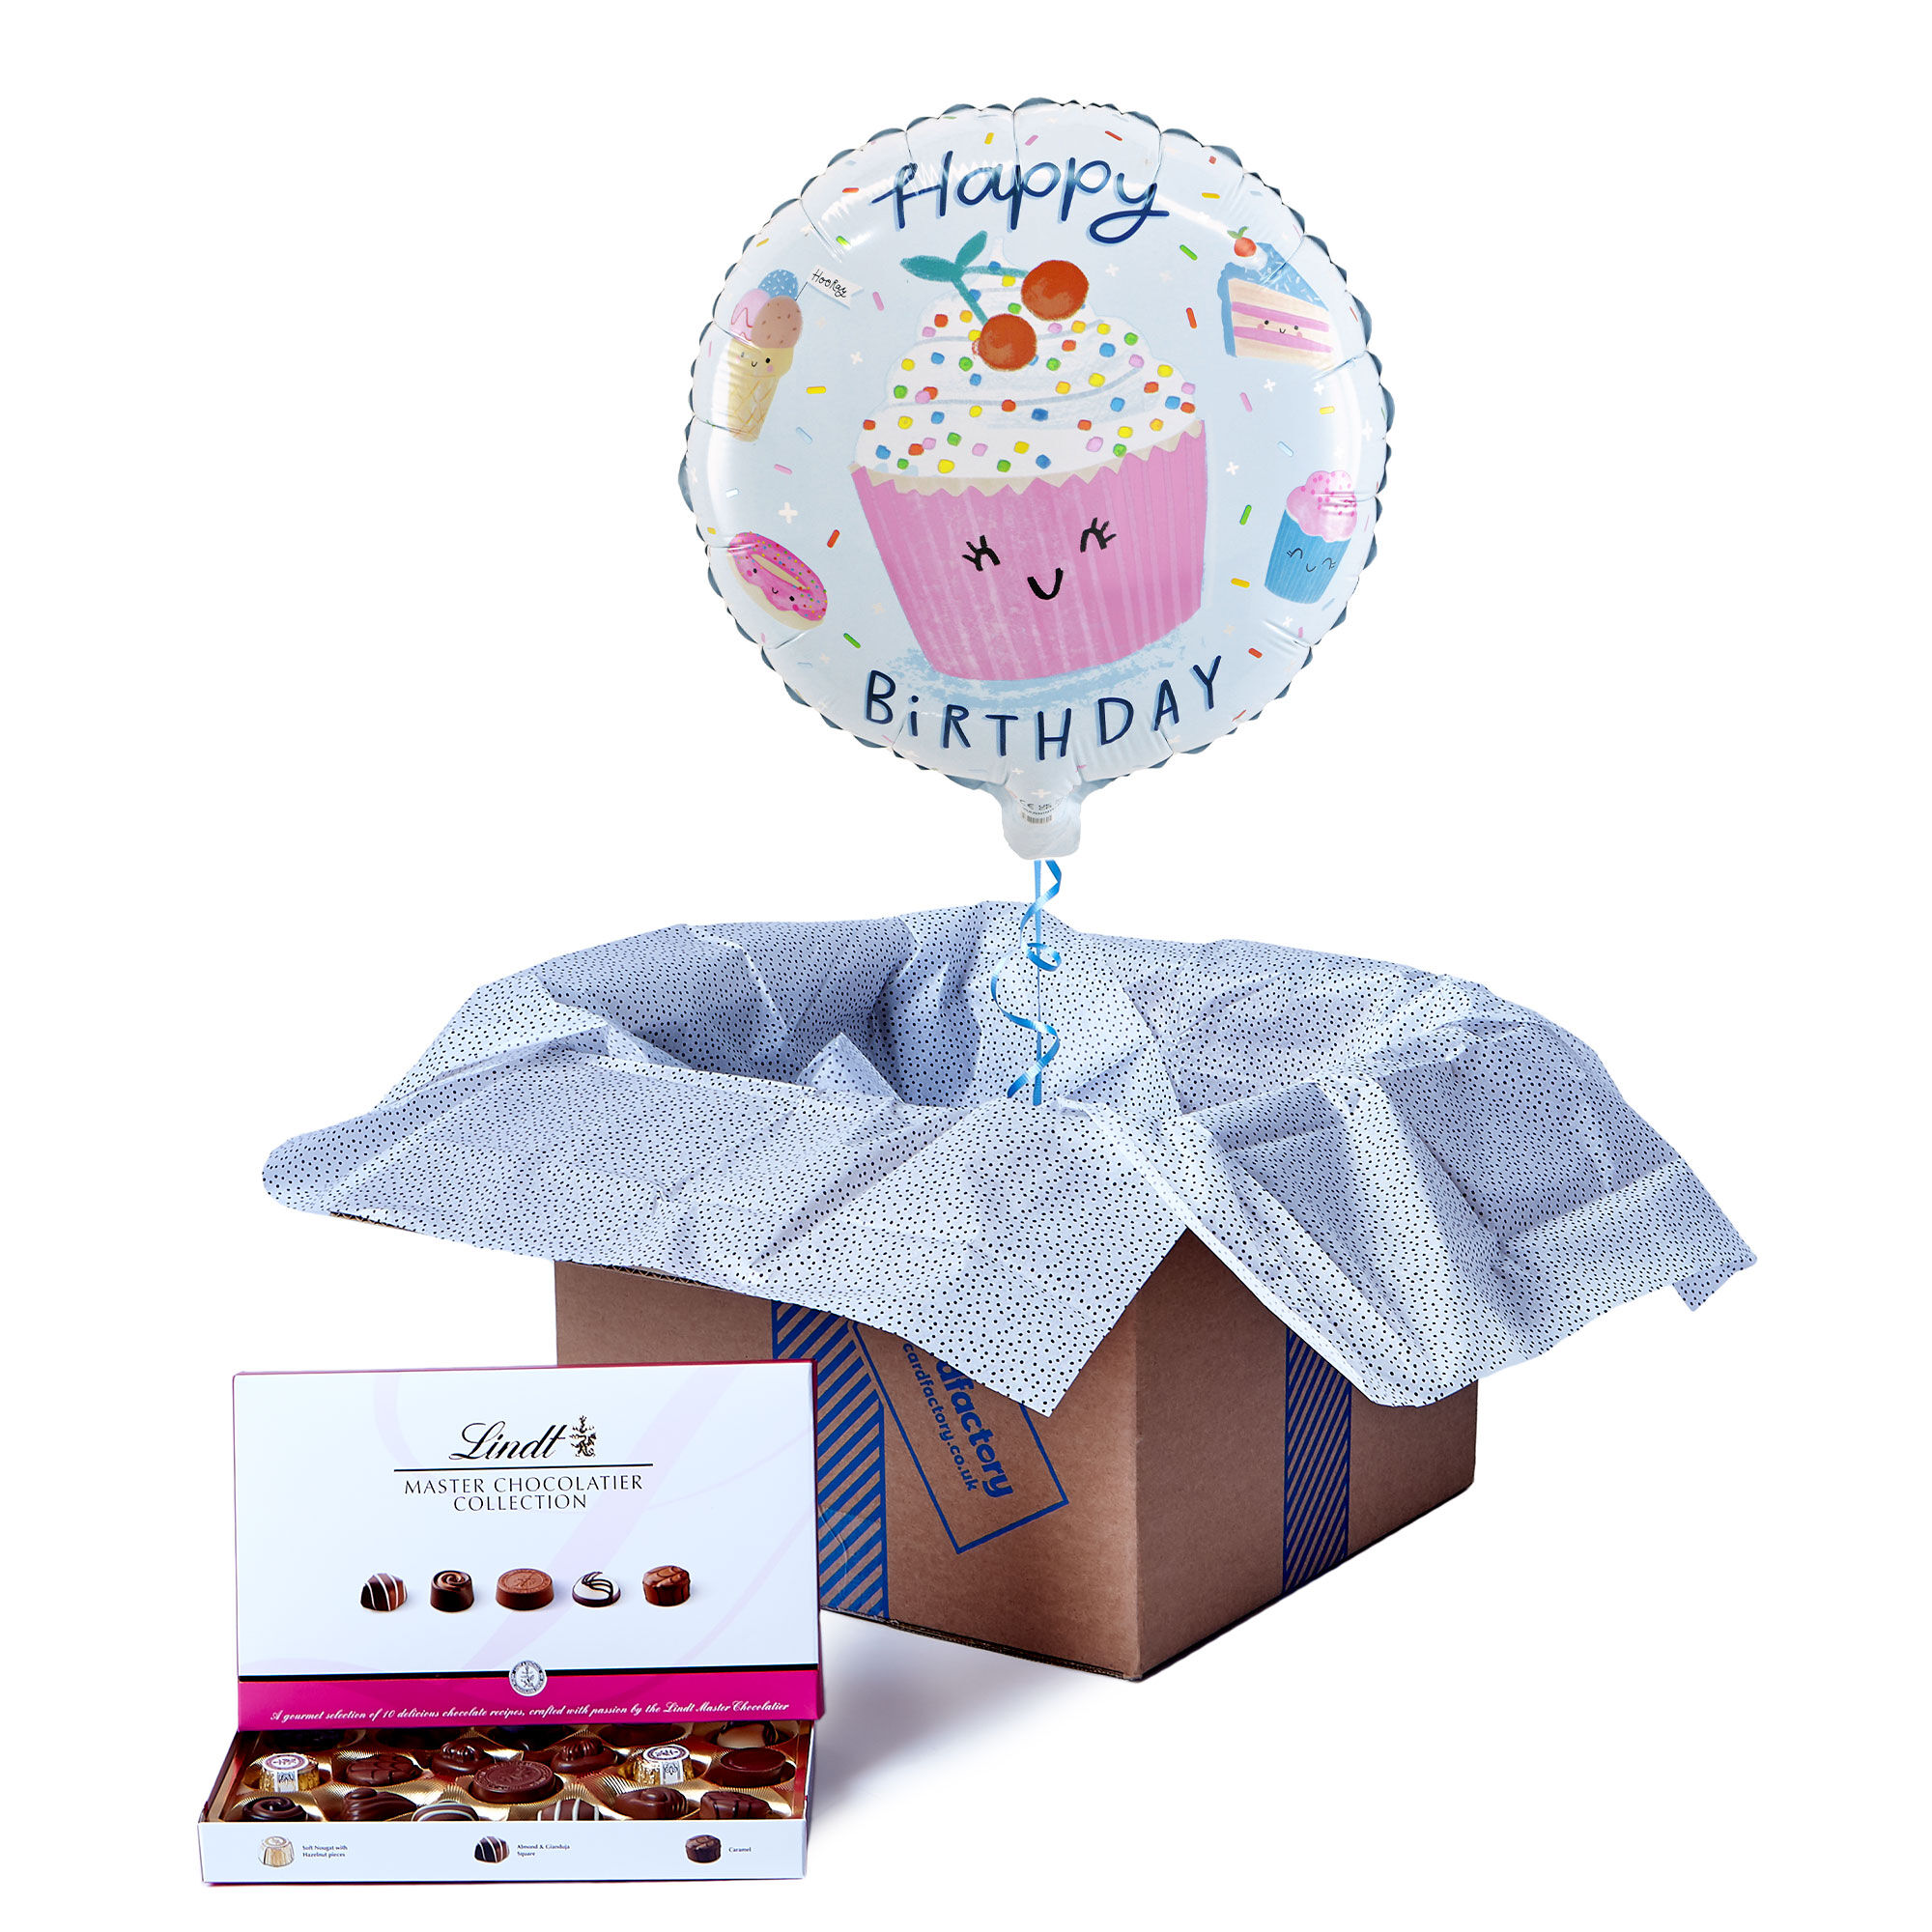 Online Cyber Balloons Gifts Delivery in Chennai, Deliver balloons gifts in  Chennai, Best Gift Ideas of balloons Bouquet, Same Day 3-Hour Delivery  Chennai India, Birthday Gifts, Buy Birthday Gifts Online Chennai, Send